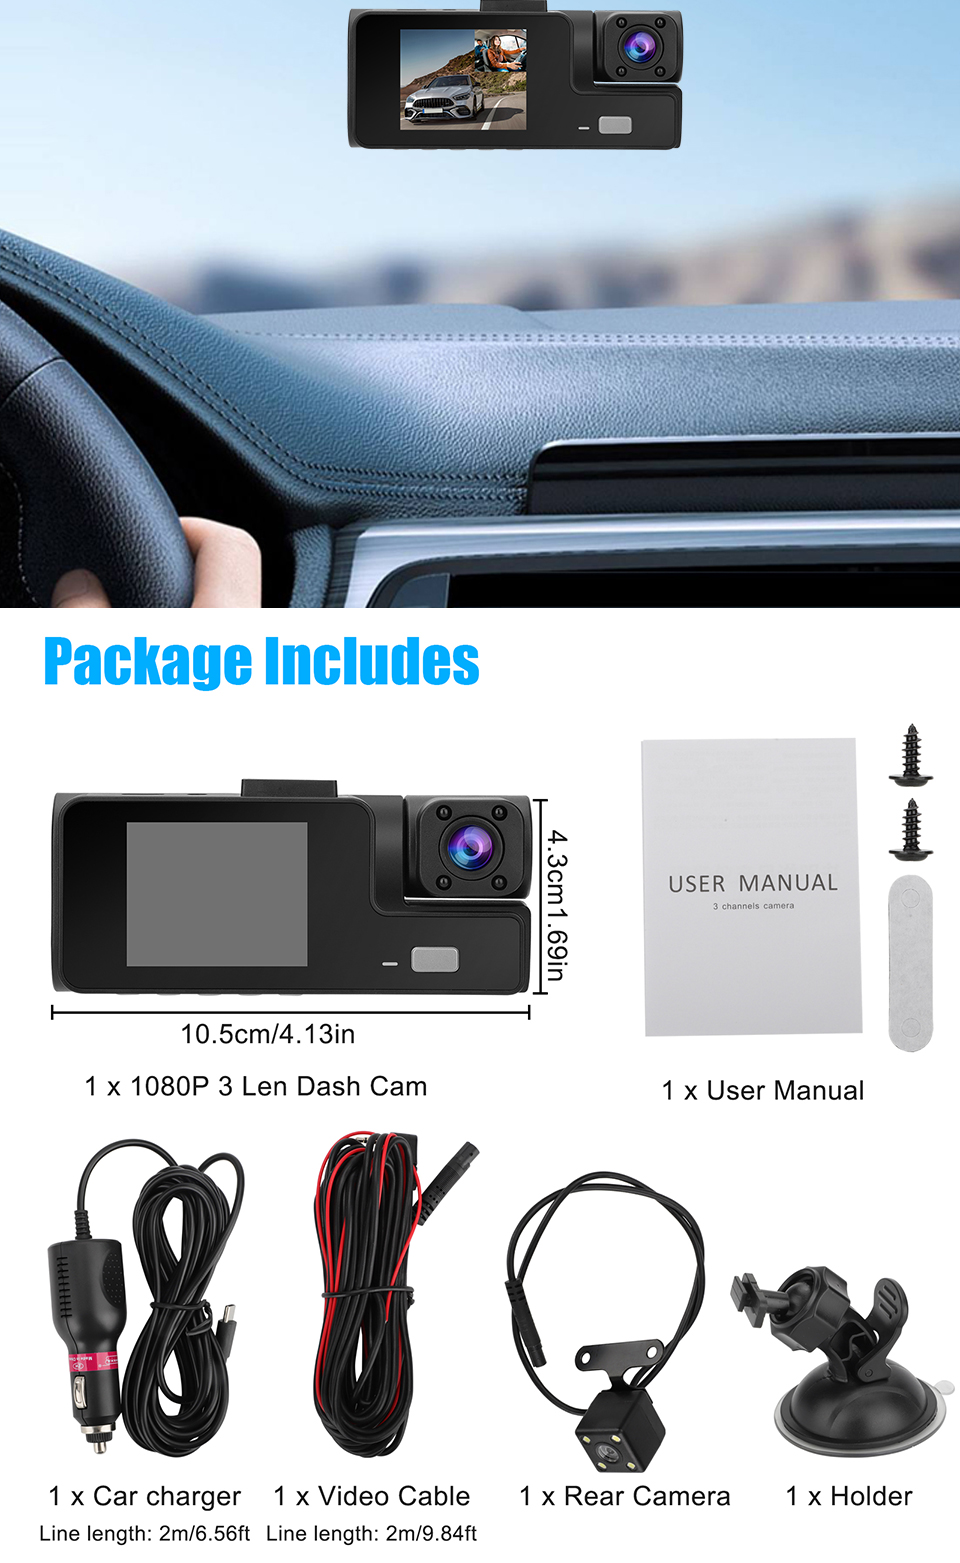 SRS 2 Android 4G Mini DashCam Full Set with 24hr Remote Monitoring 3G/4G  Sim WiFi MicroSD GPS Night Vision Dual Camera Car DVR & PlayStore App